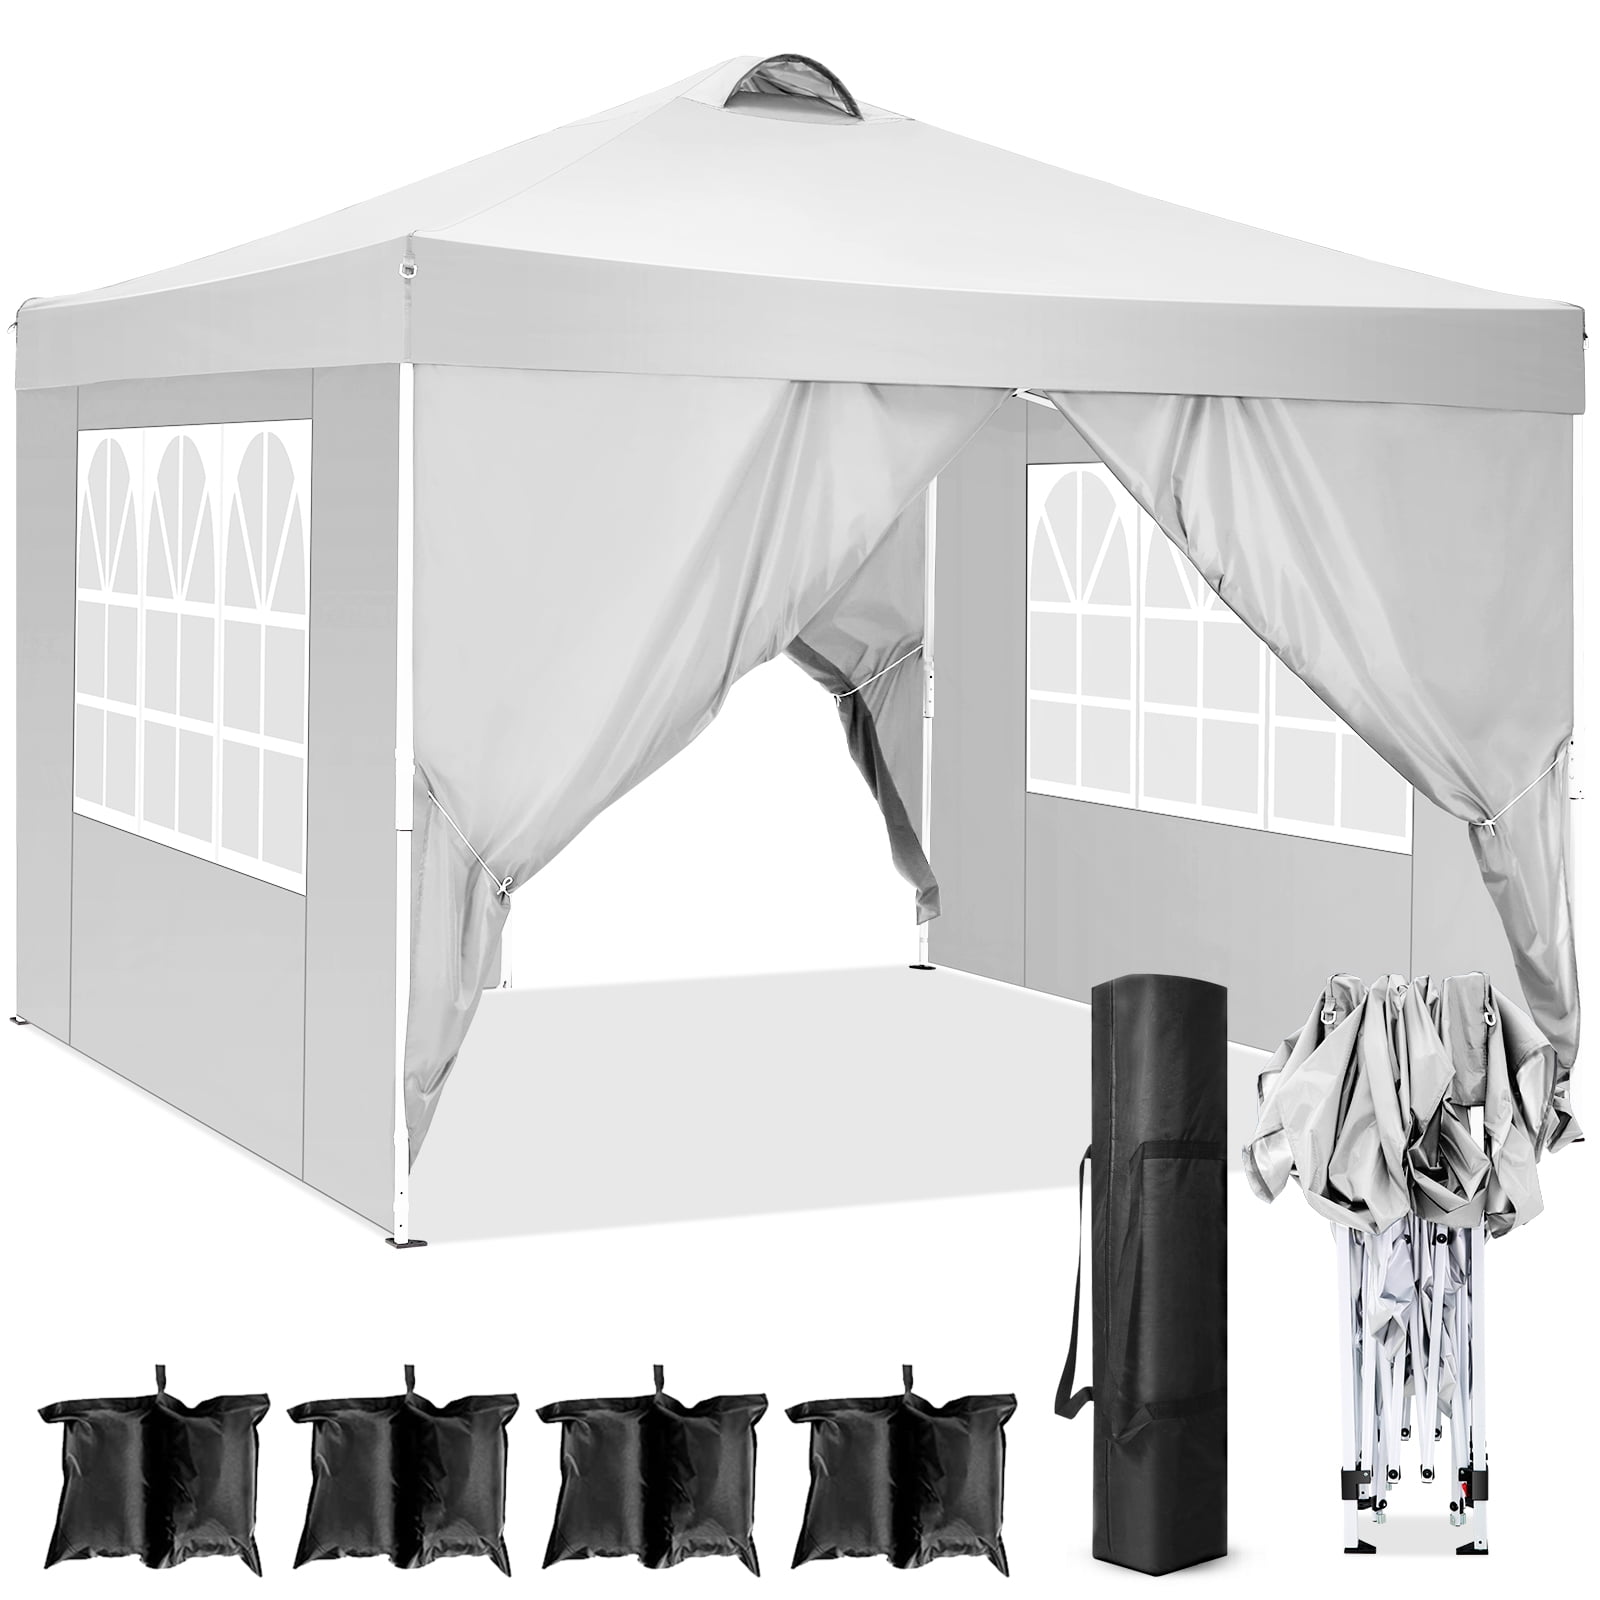  Oneofics Canopy Tent, 10X10 FT Pop Up Canopy Outdoor Instant  Tent Slant Legs with Carrying Bag, Portable Gazebo Shelter for Patio Deck  Garden and Beach - 8X8 FT Canopy Cover 